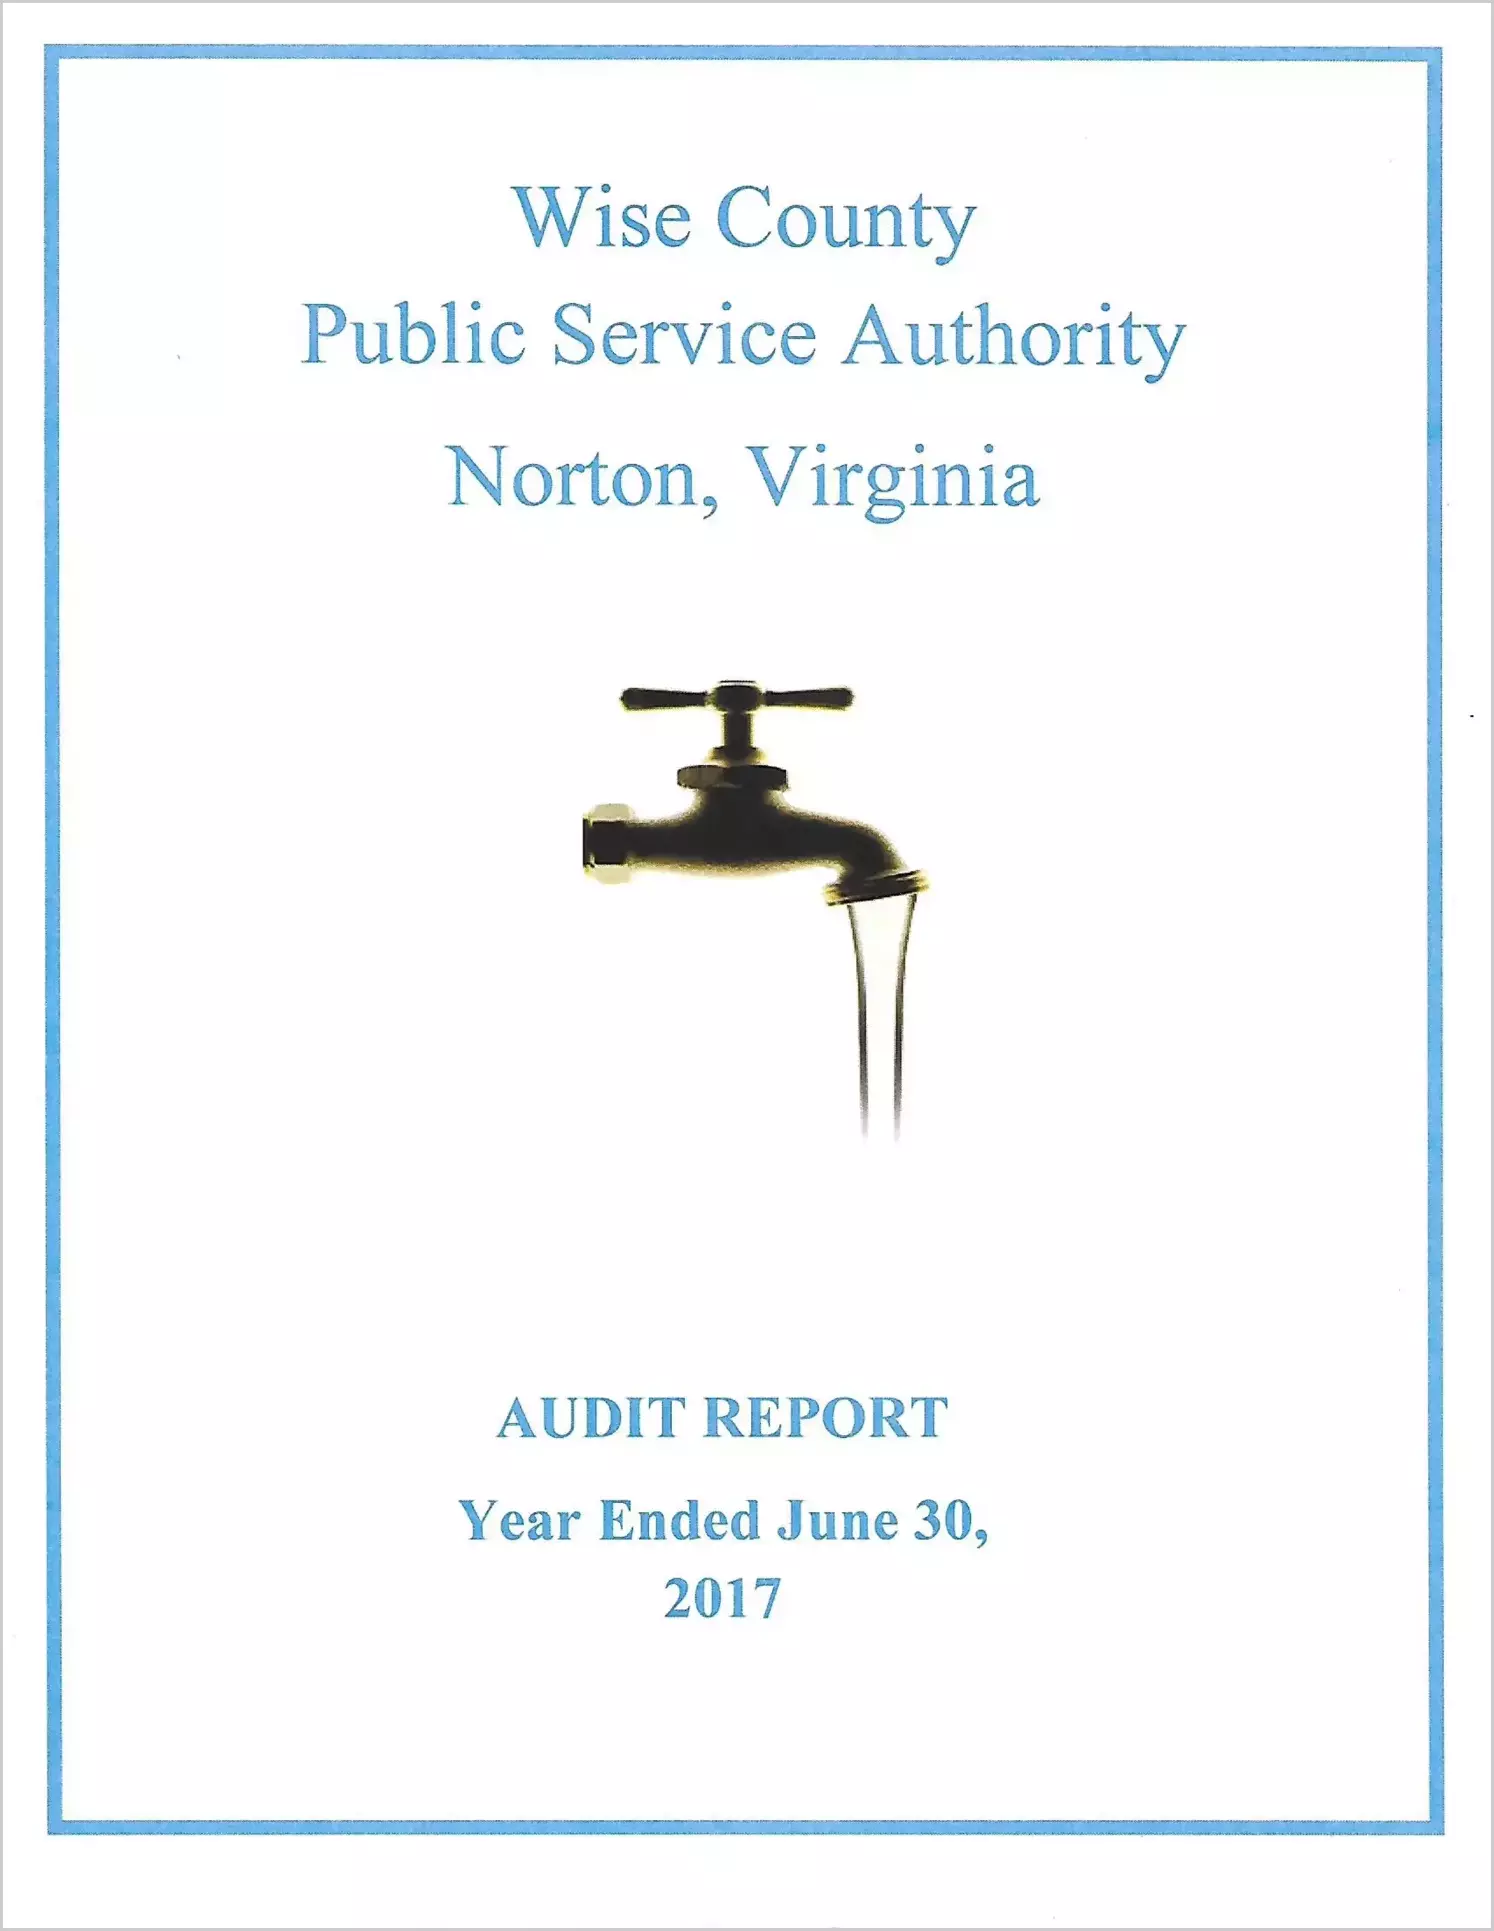 2017 ABC/Other Annual Financial Report  for Wise County Public Service Authority